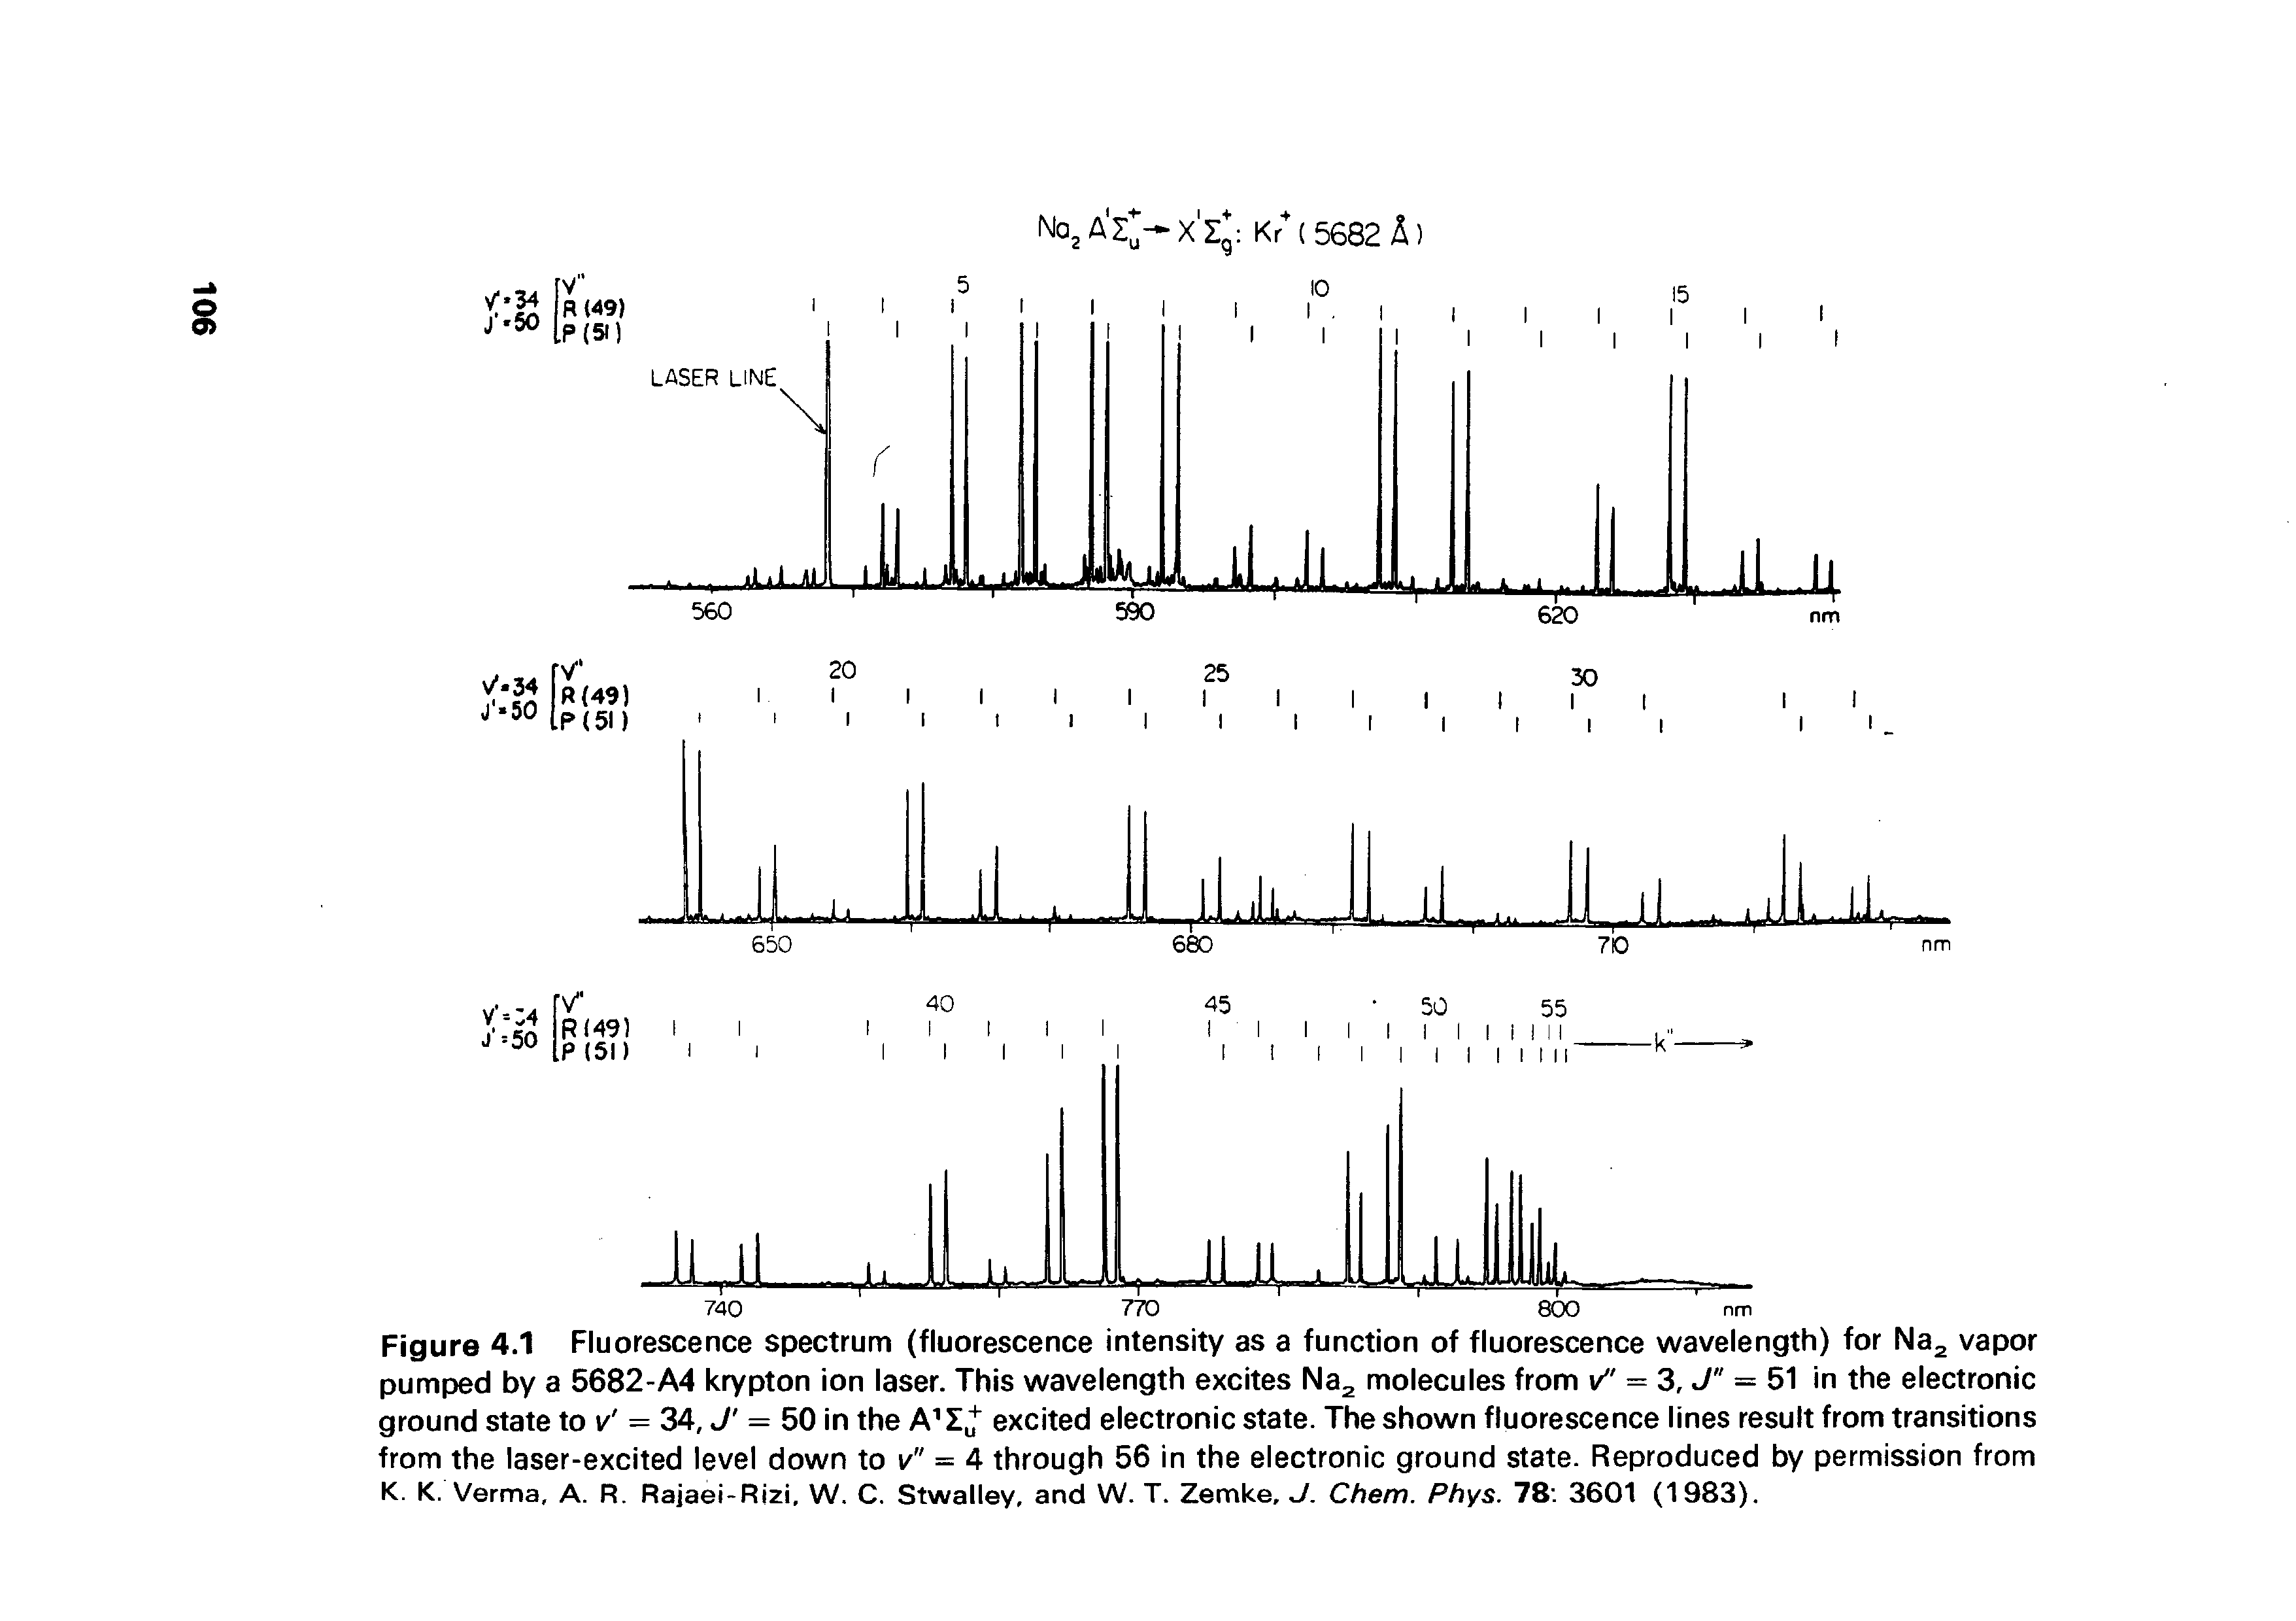 Figure 4.1 Fluorescence spectrum (fluorescence intensity as a function of fluorescence wavelength) for Naa vapor pumped by a 5682-A4 krypton ion laser. This wavelength excites Na2 molecules from v" = 3, J" = 51 in the electronic ground state to v = 34, J = 50 in the excited electronic state. The shown fluorescence lines result from transitions from the laser-excited level down to v" = 4 through 56 in the electronic ground state. Reproduced by permission from K. K. Verma, A. R. Rajaei-Rizi, W. C. Stwalley, and W. T. Zemke, J. Chem. Phys. 78. 3601 (1983).